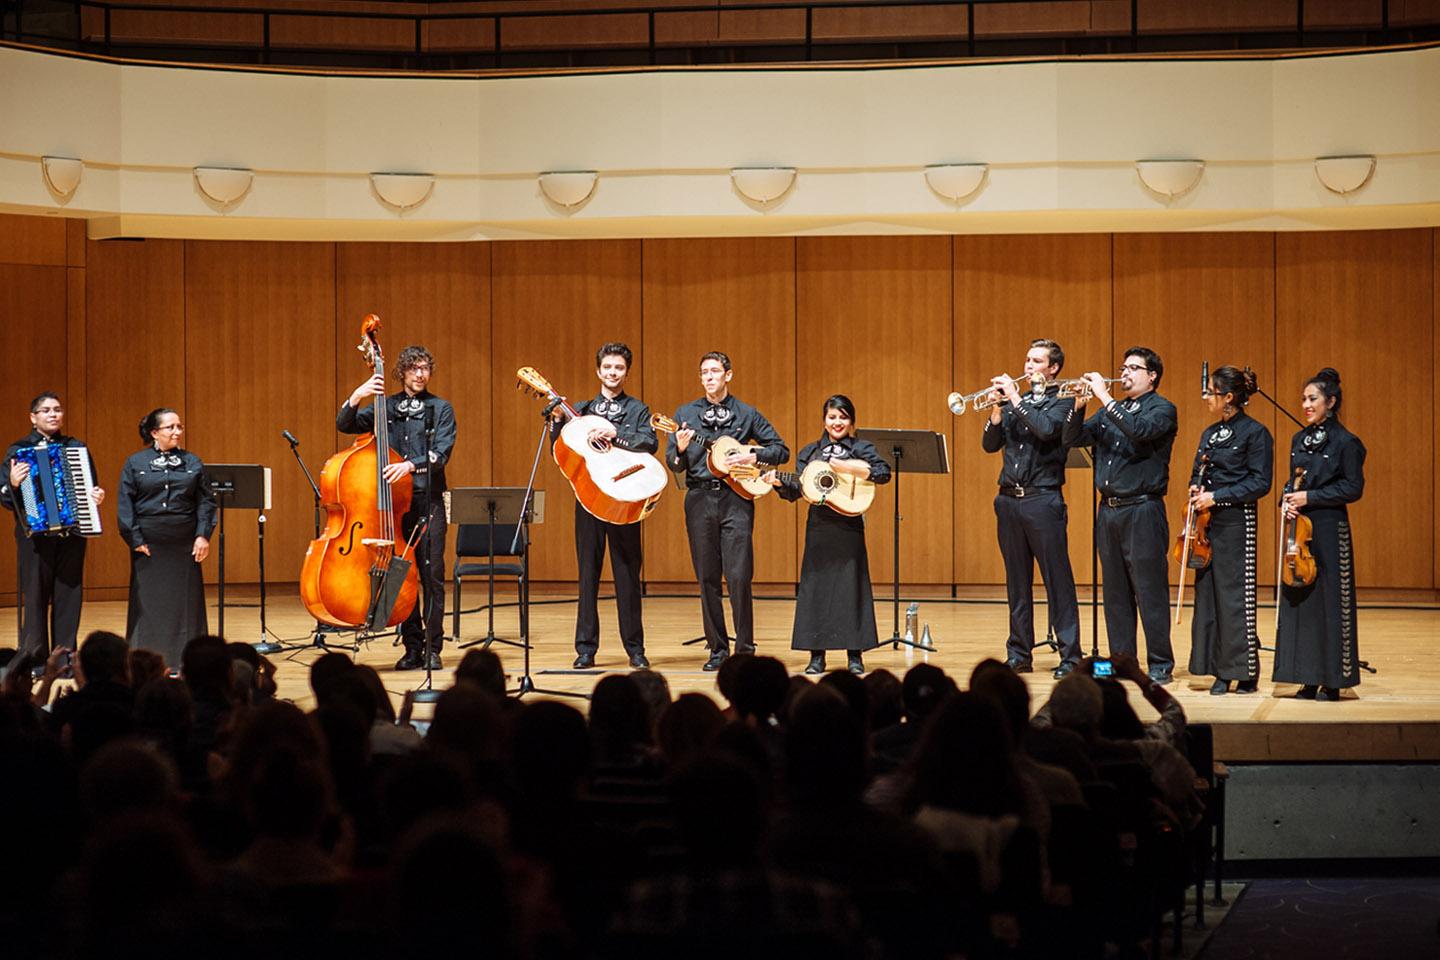 Mariachi ensemble performing in the King Center Concert Hall